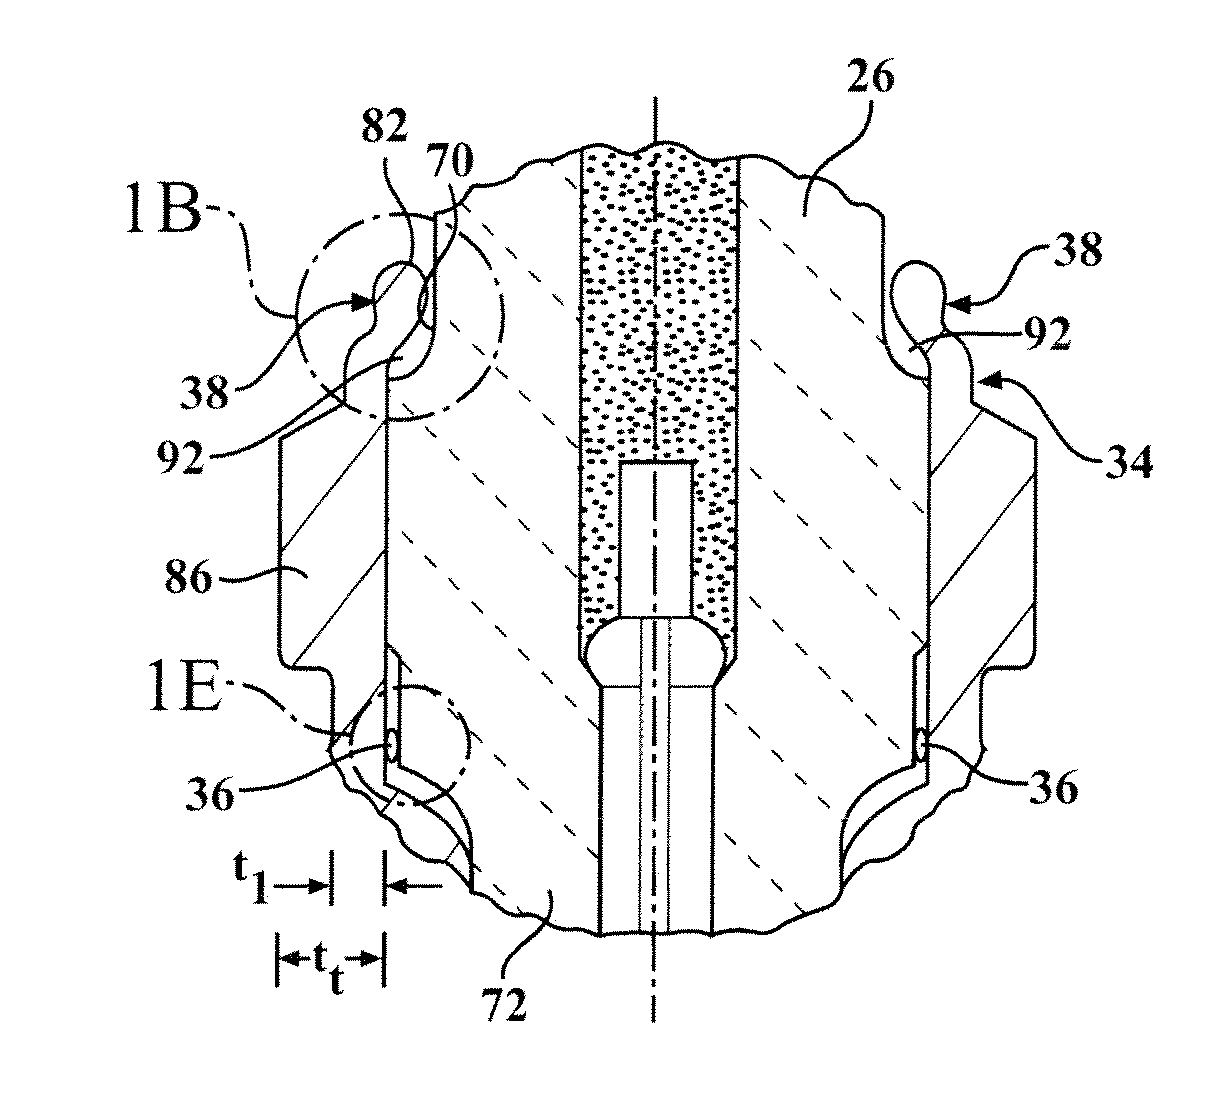 Igniter assembly including arcing reduction features